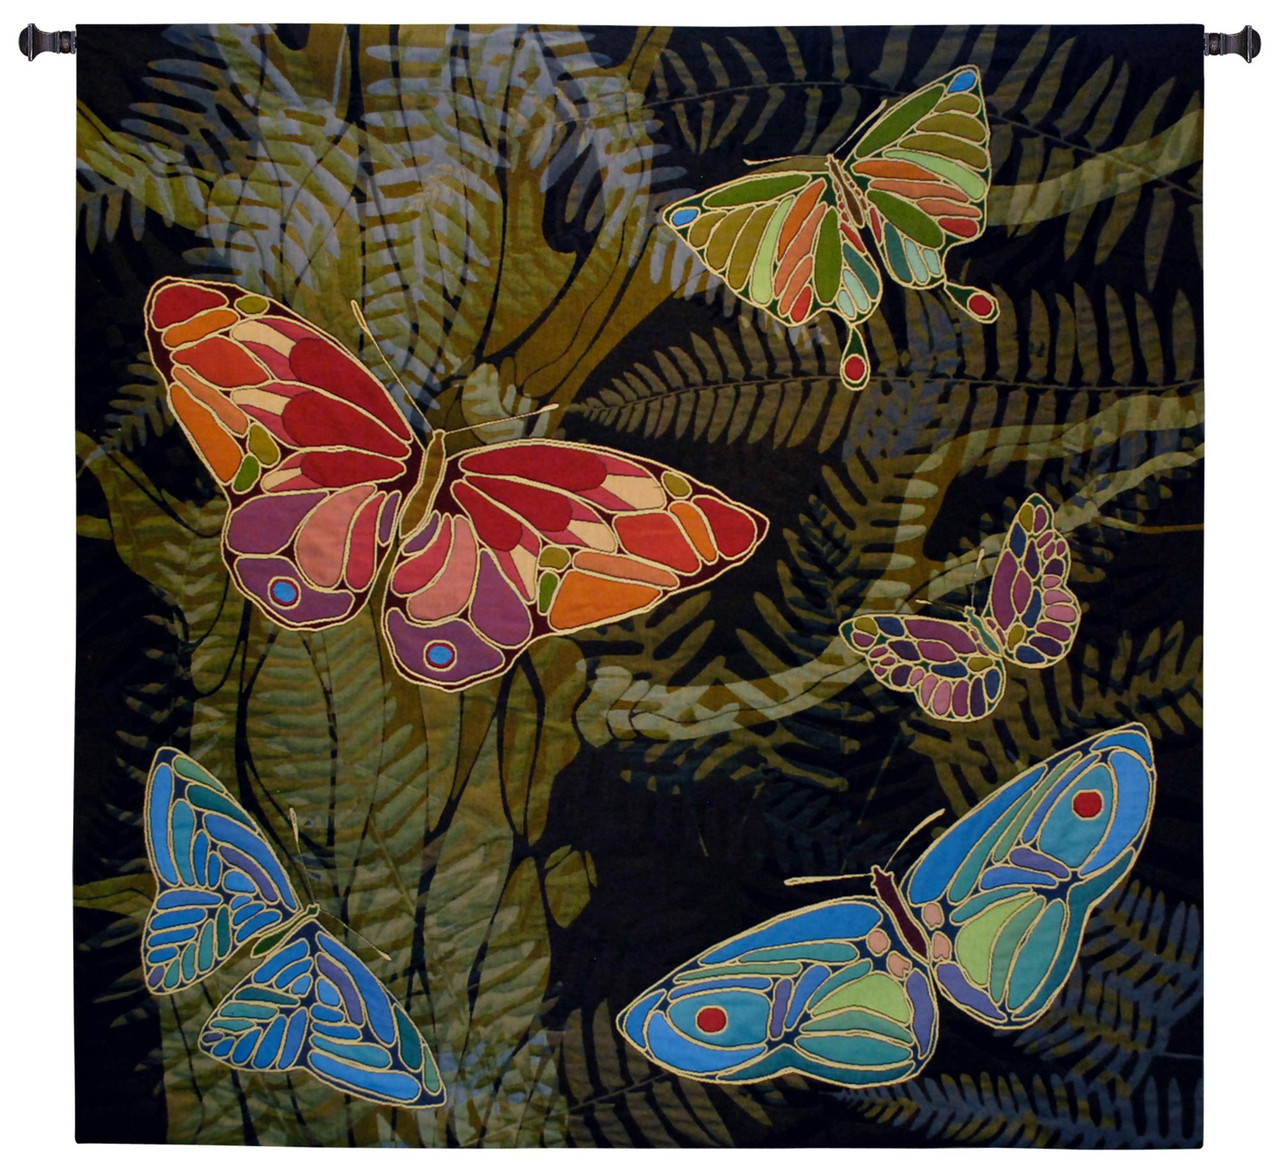 Woodland Butterfly by Julianna James Woven Tapestry Wall Art Hanging  Colorful Textured Nature Mosaic Artwork 100% Cotton USA Size 53x53